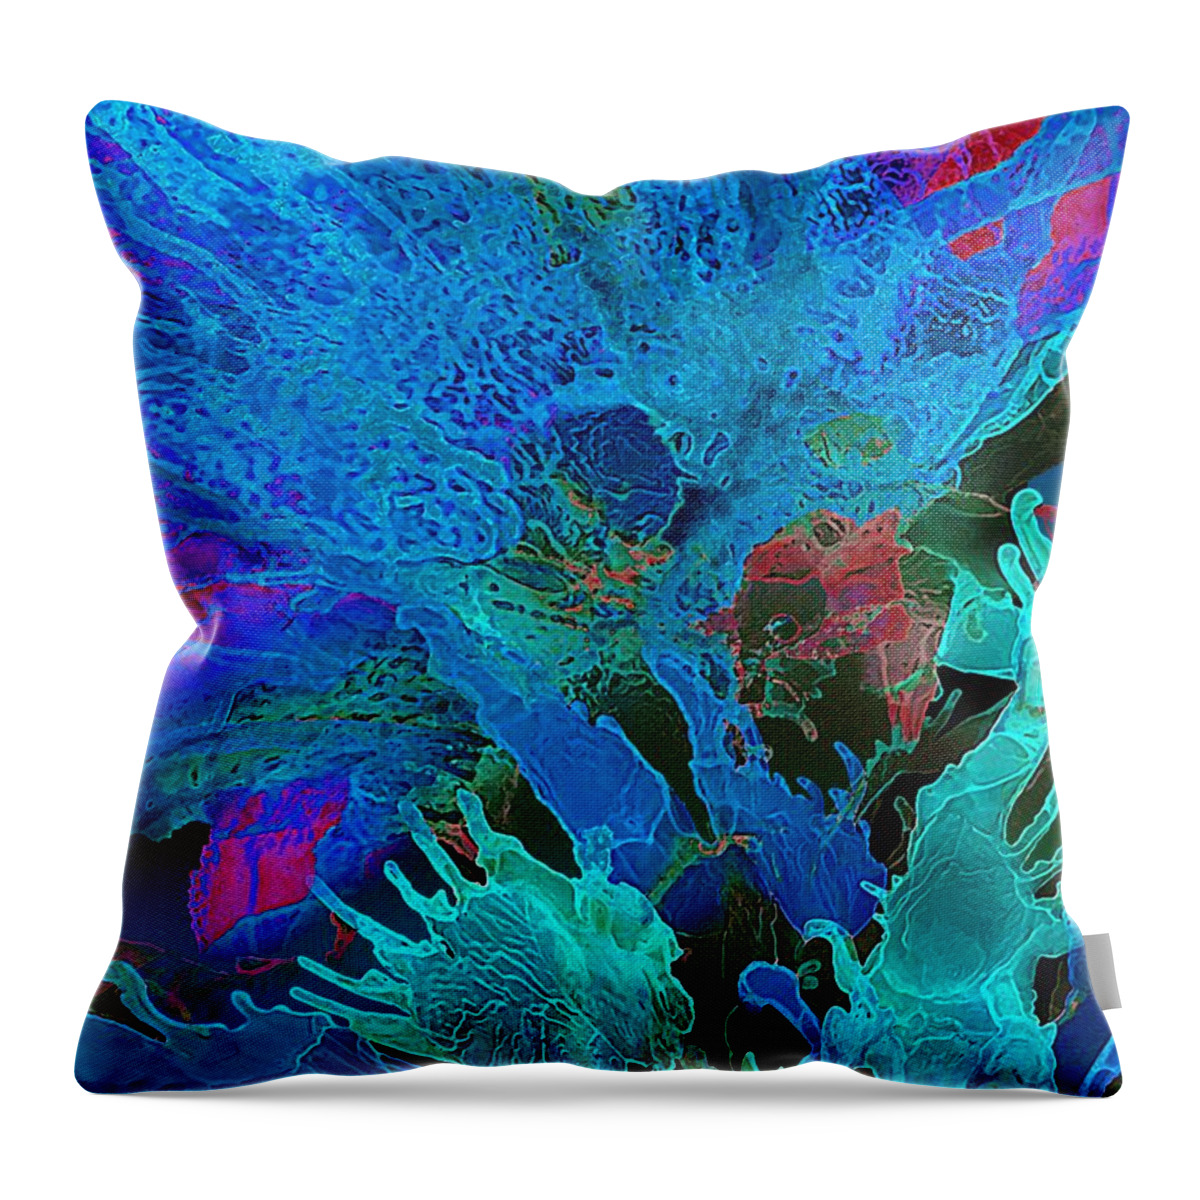 Abstract Throw Pillow featuring the digital art Sea Flower by Klara Acel